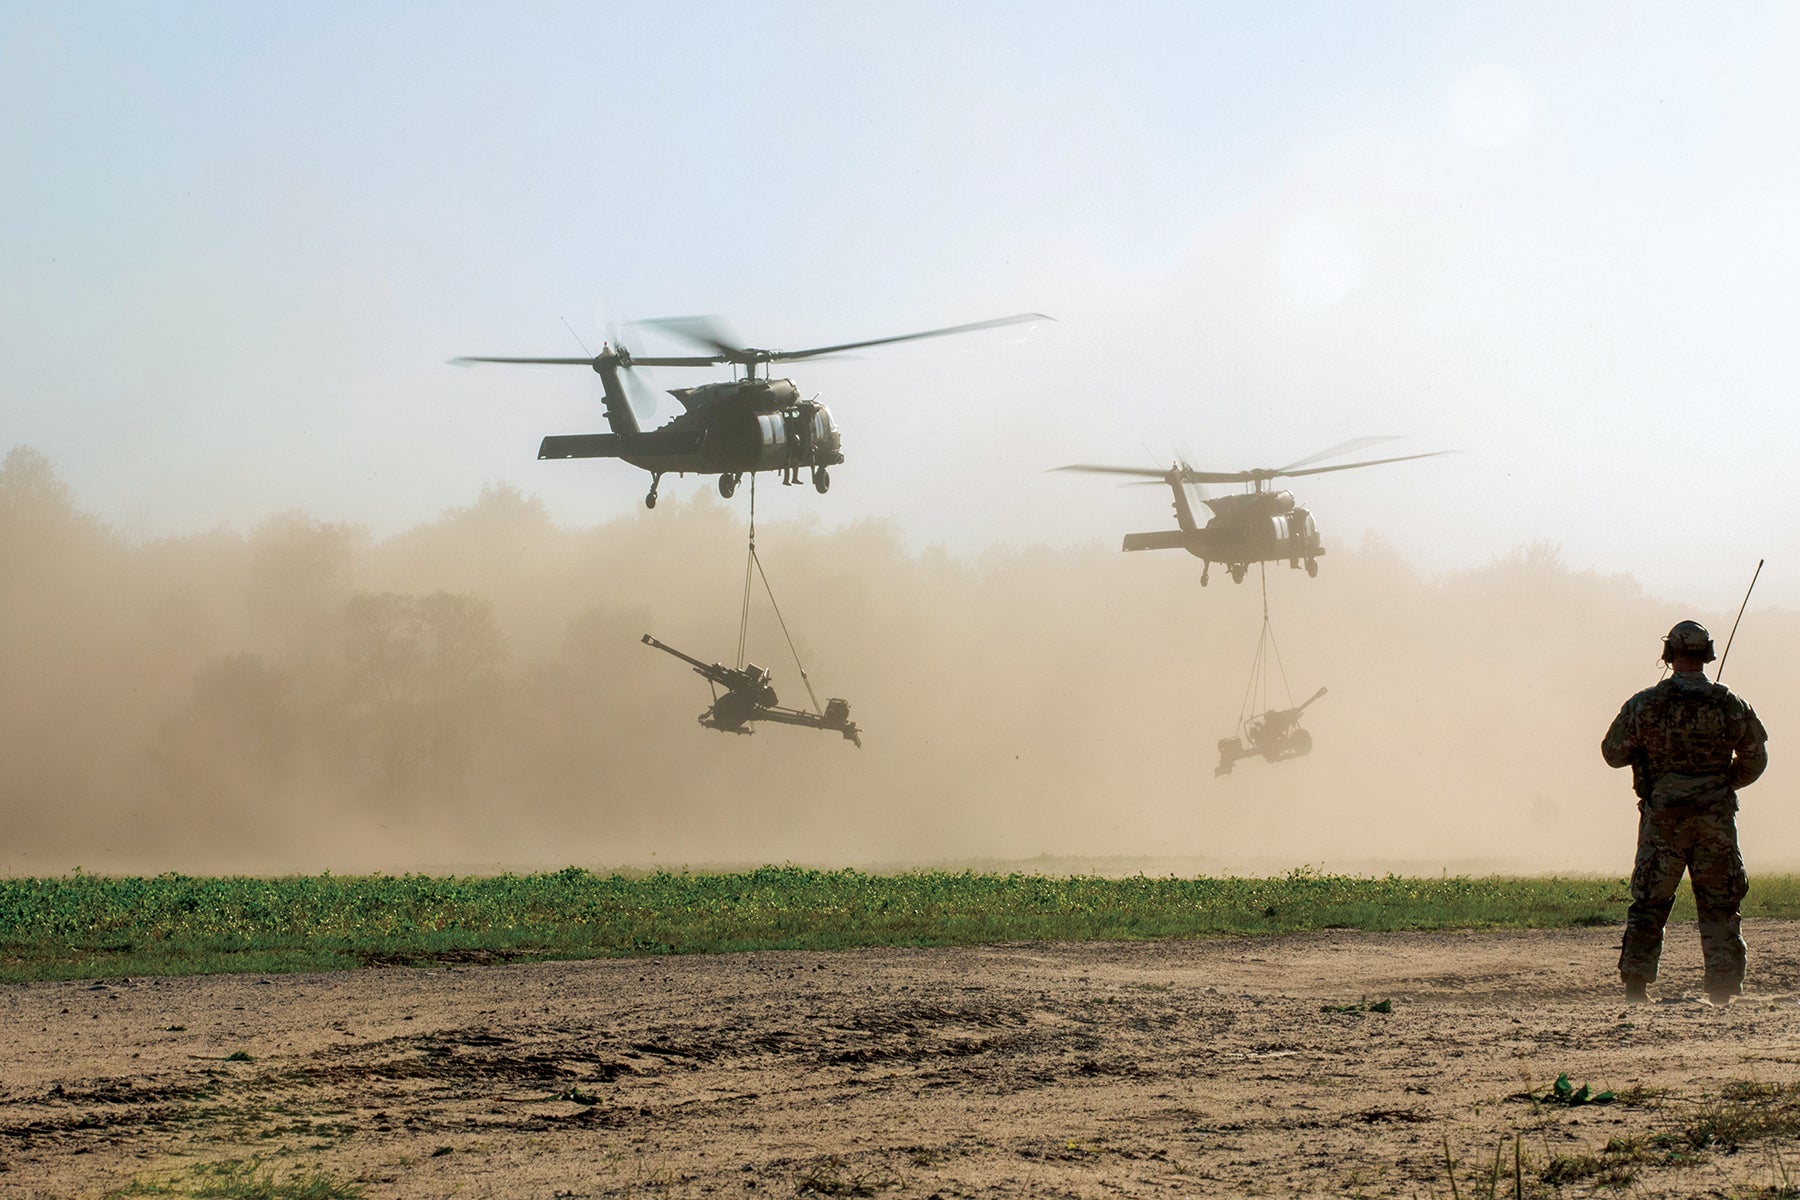 An Ohio Army National Guard soldier observes as UH-60 Black Hawk helicopters bring in howitzers during training at Camp Grayling. (Credit: Ohio Army National Guard/Spc. Olivia Lauer)